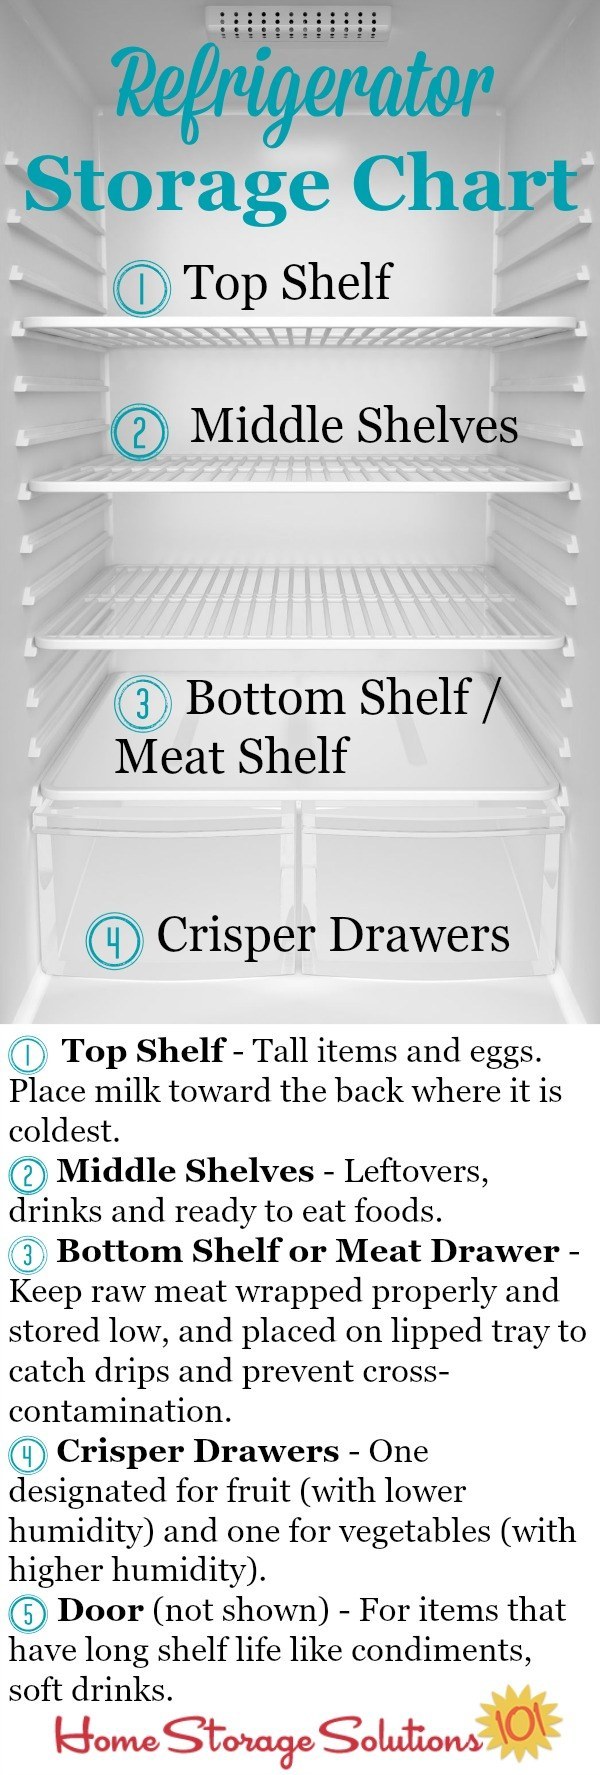 Then store everything in your fridge according to which areas in your fridge are the coldest.